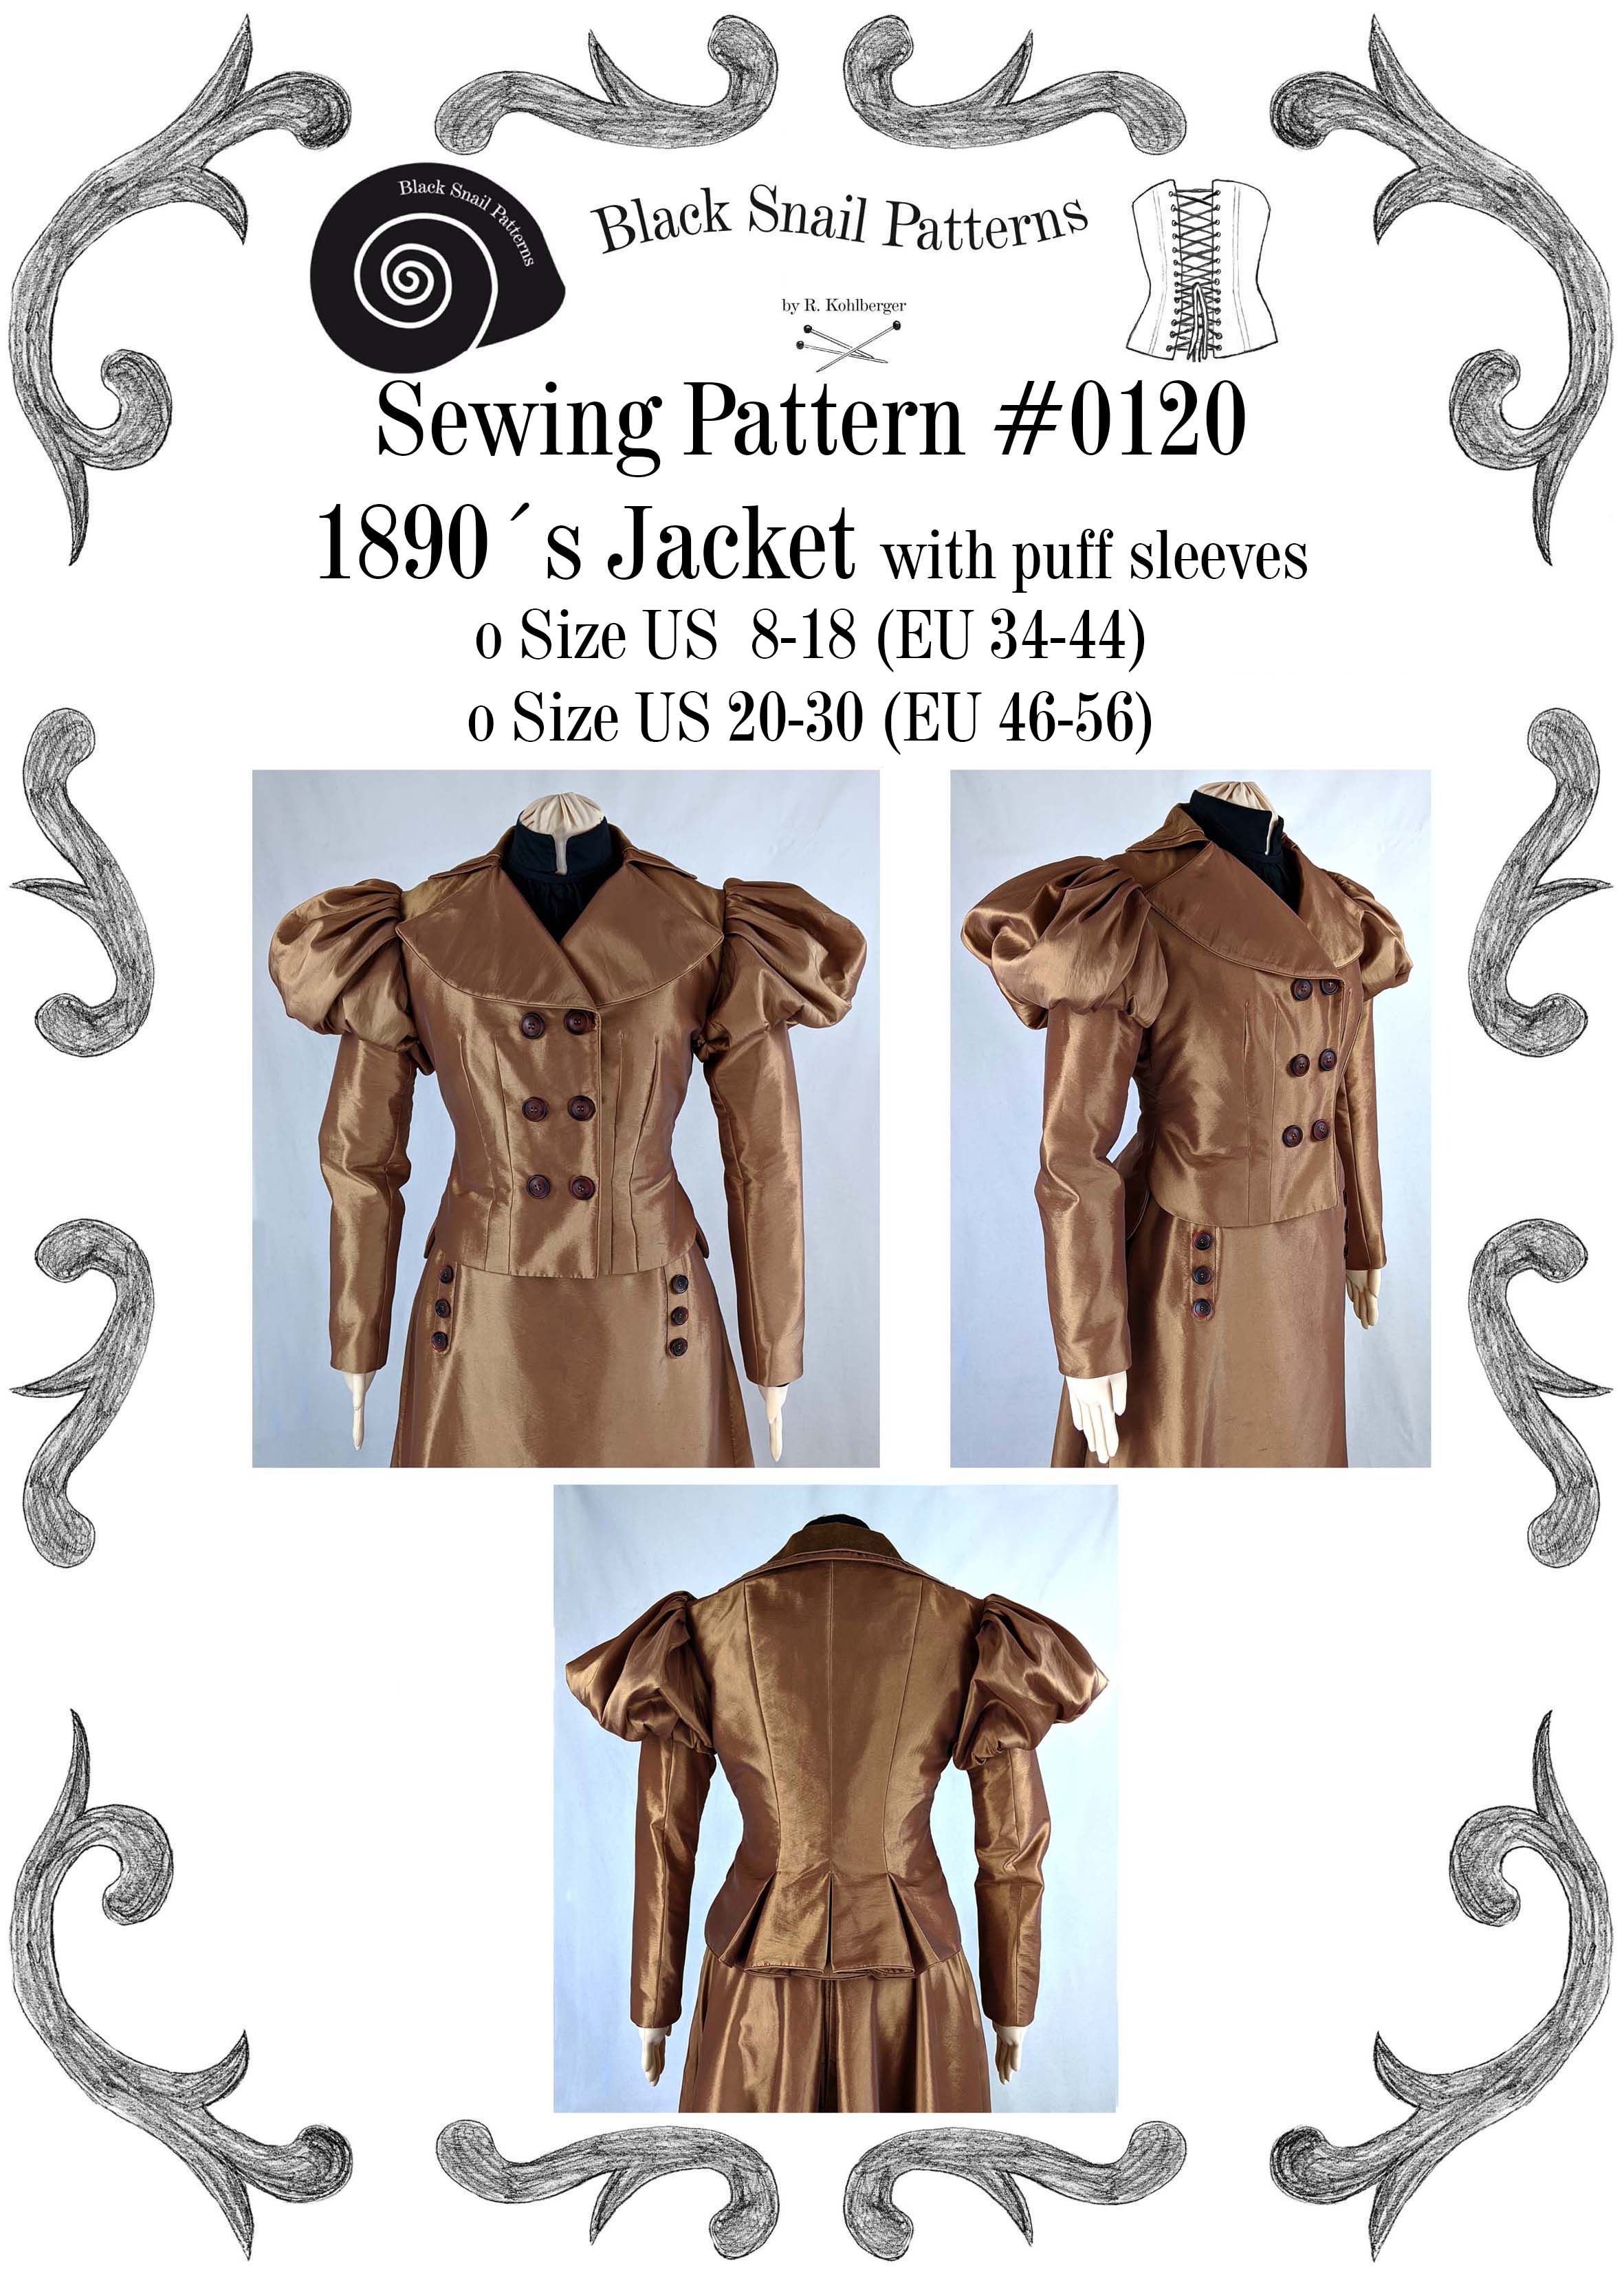 #0120 Edwardian Jacket with puff sleeves 1890 Sewing Pattern